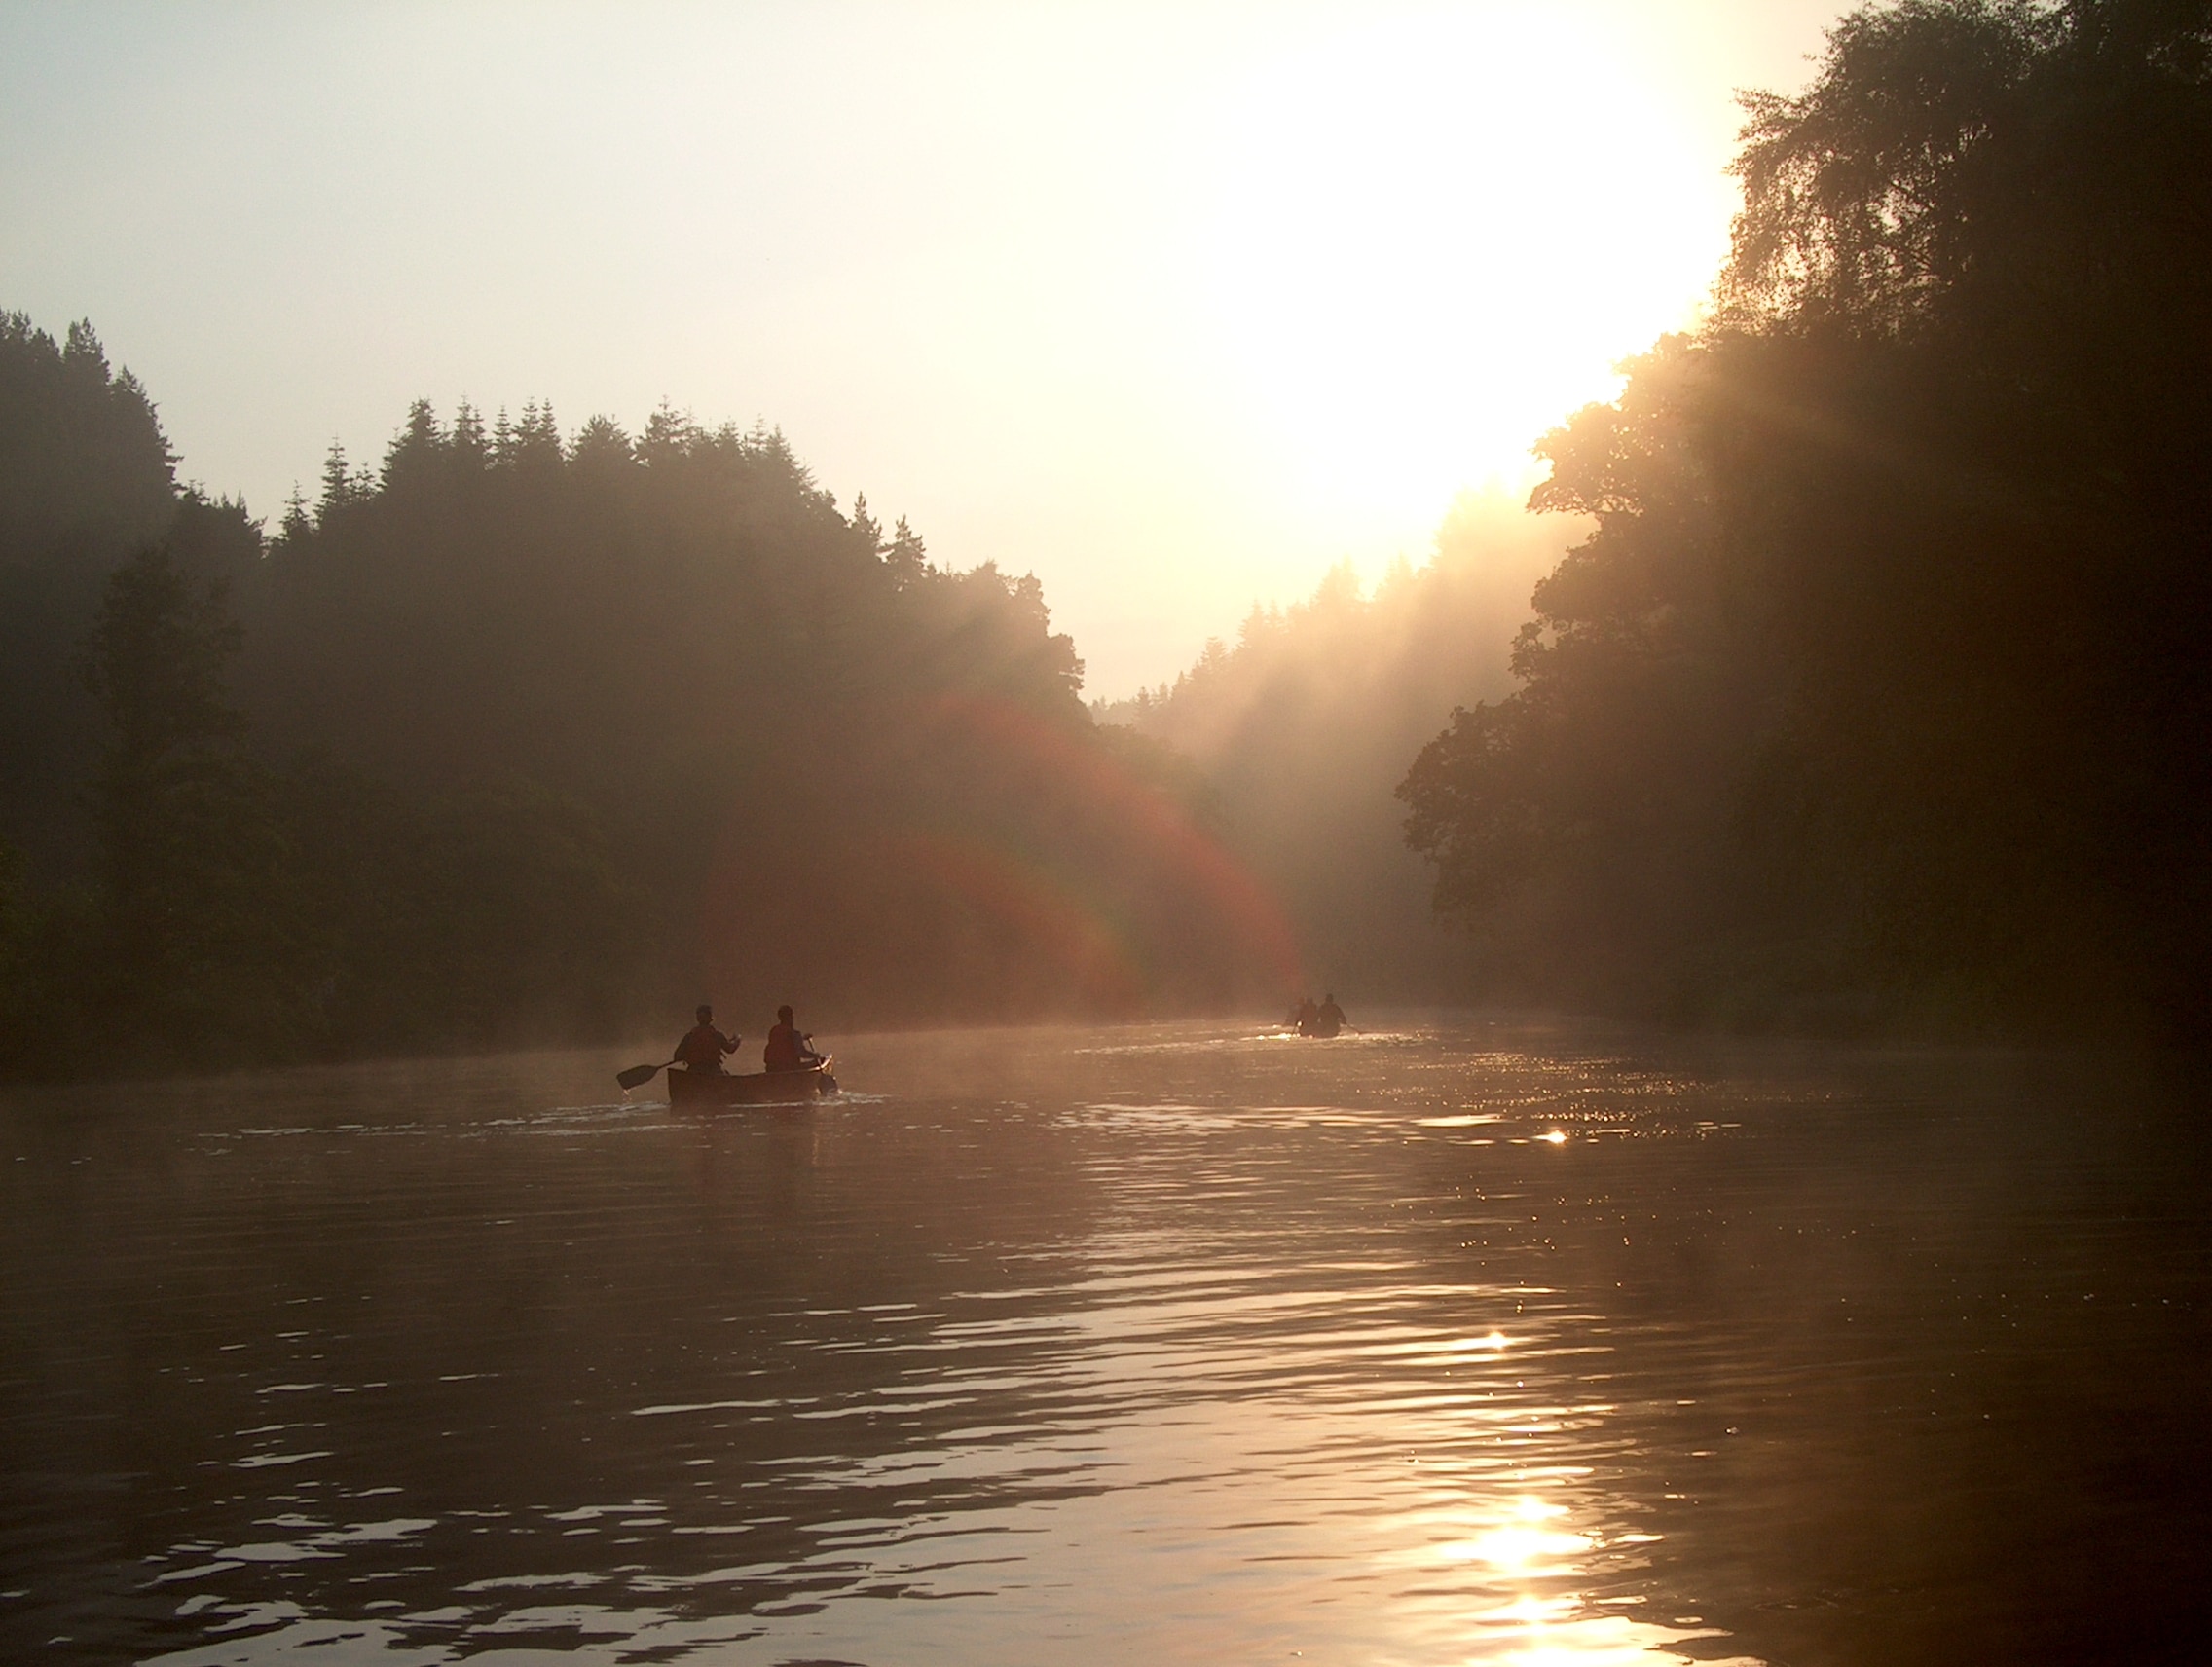 Canoeing on a misty lake in the Highlands